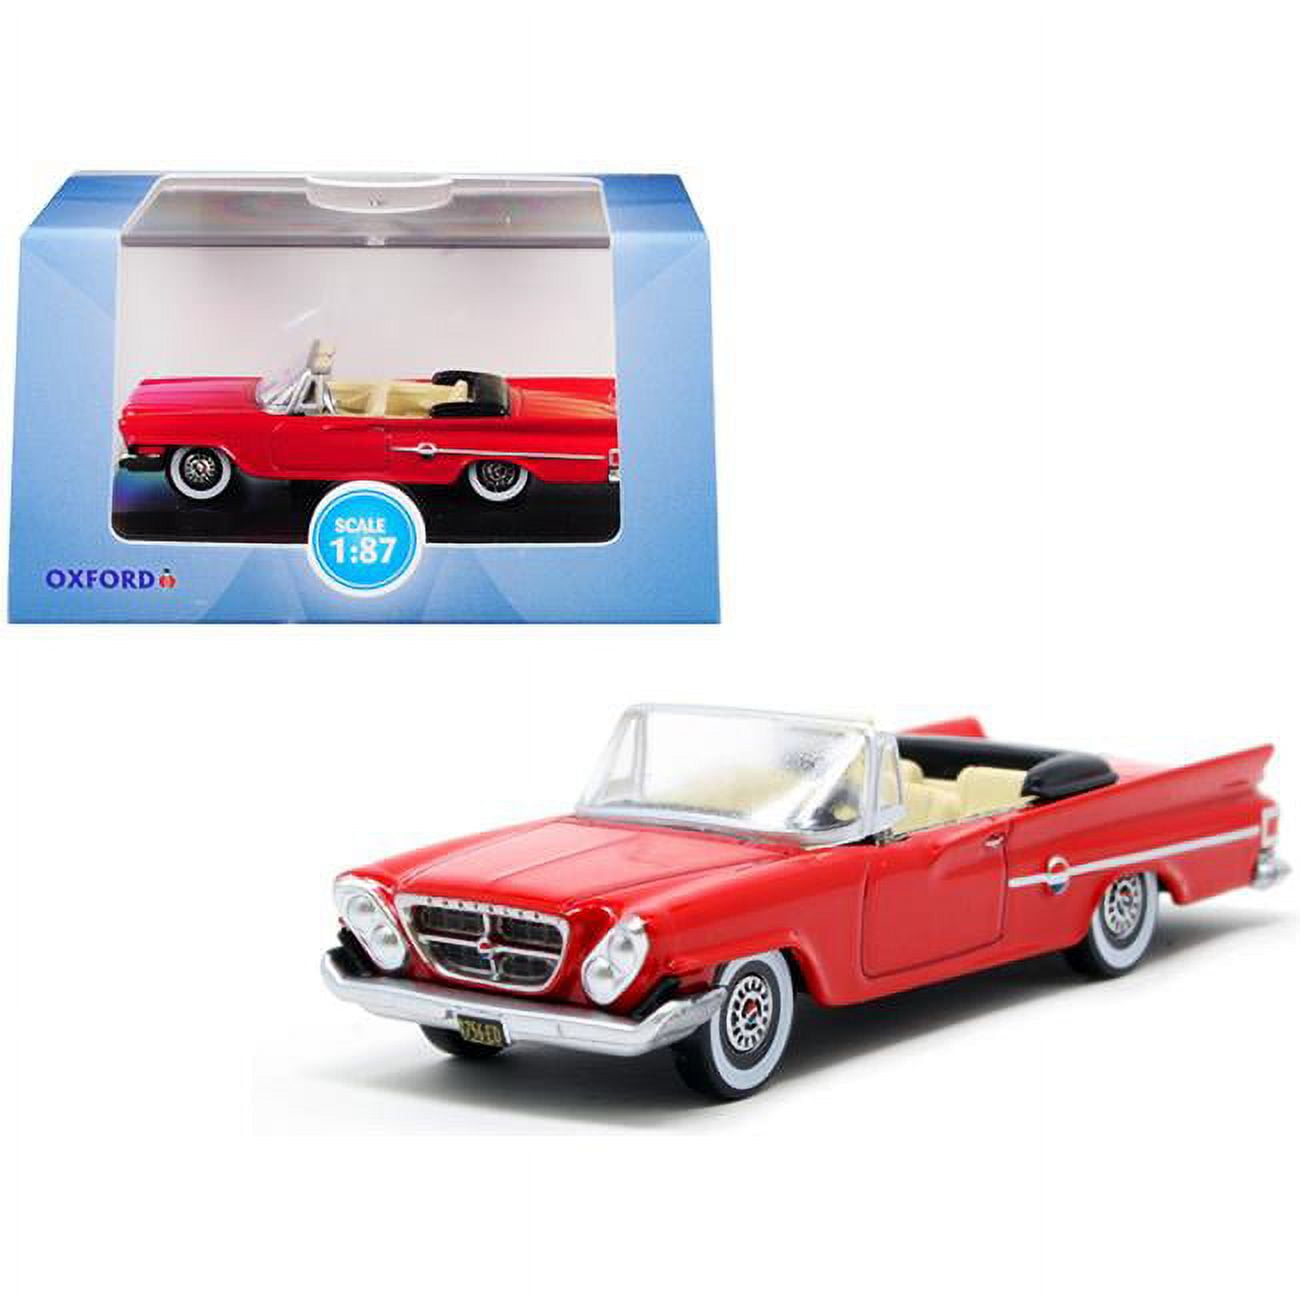 87cc61001 1961 Chrysler 300 Convertible Mardi Gras 1 By 87 Ho Scale Diecast Model Car, Red